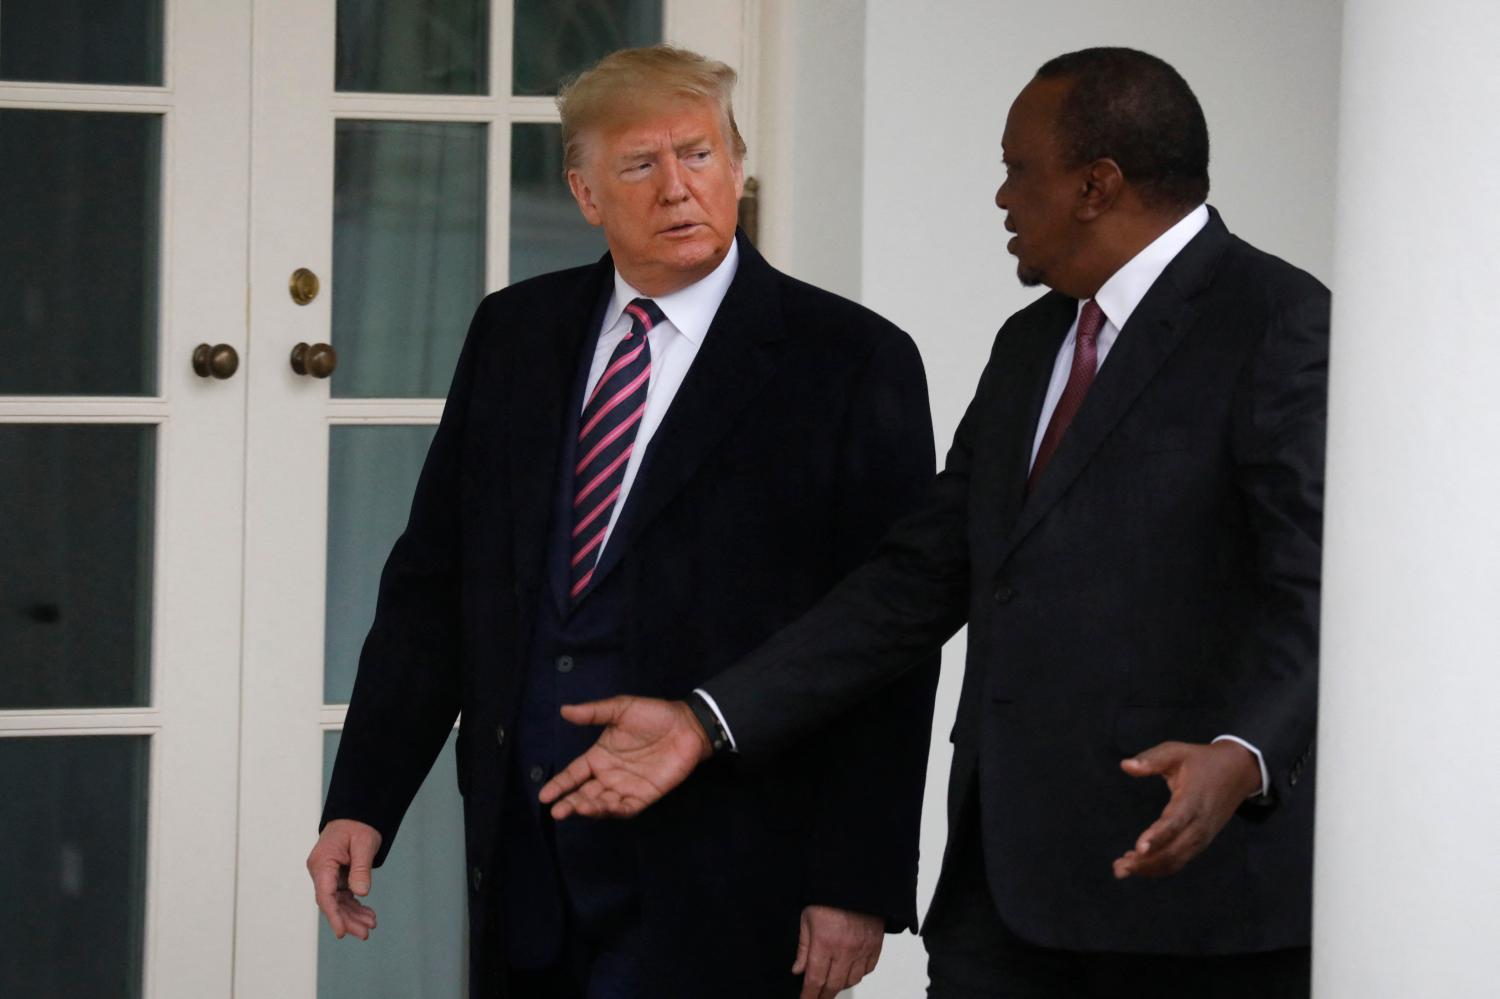 U.S. President Donald Trump points to the media as he walks with Kenyan President Uhuru Kenyatta before their meeting in the Oval Office of the White House in Washington on February 6, 2020. Photo by Yuri Gripas/ABACAPRESS.COM